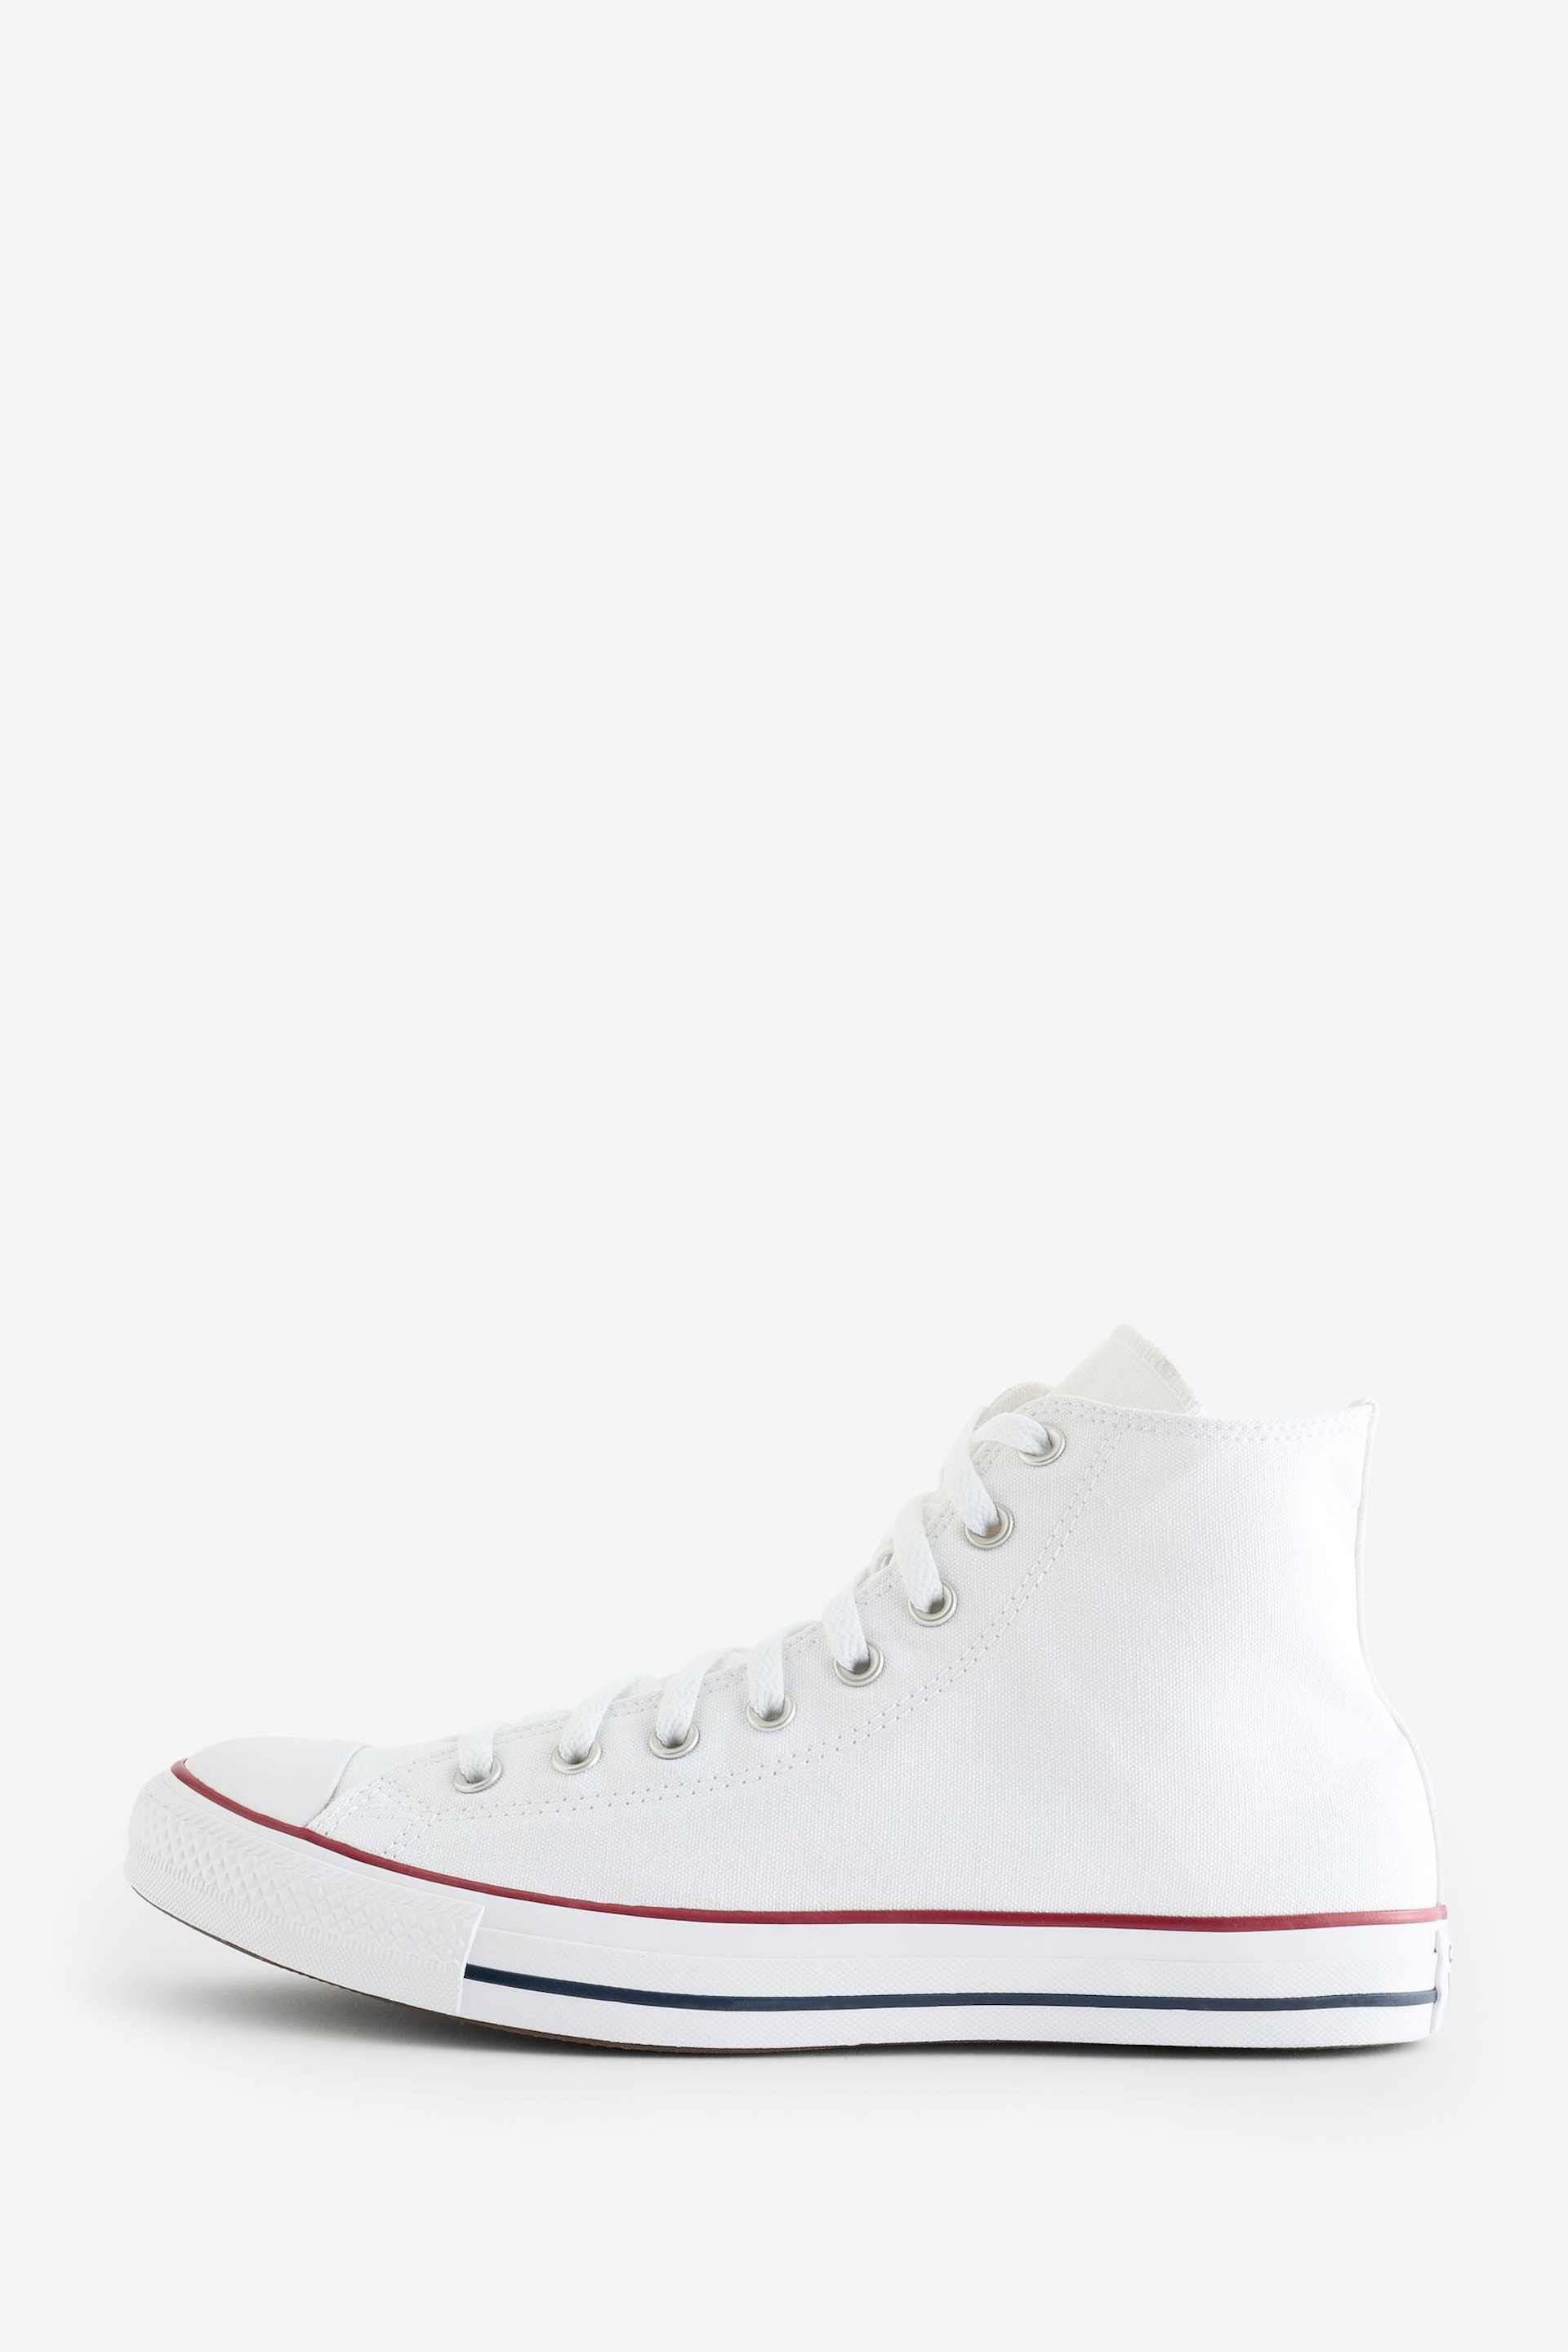 Converse White Chuck Taylor All Star Wide High Top Trainers - Image 2 of 8